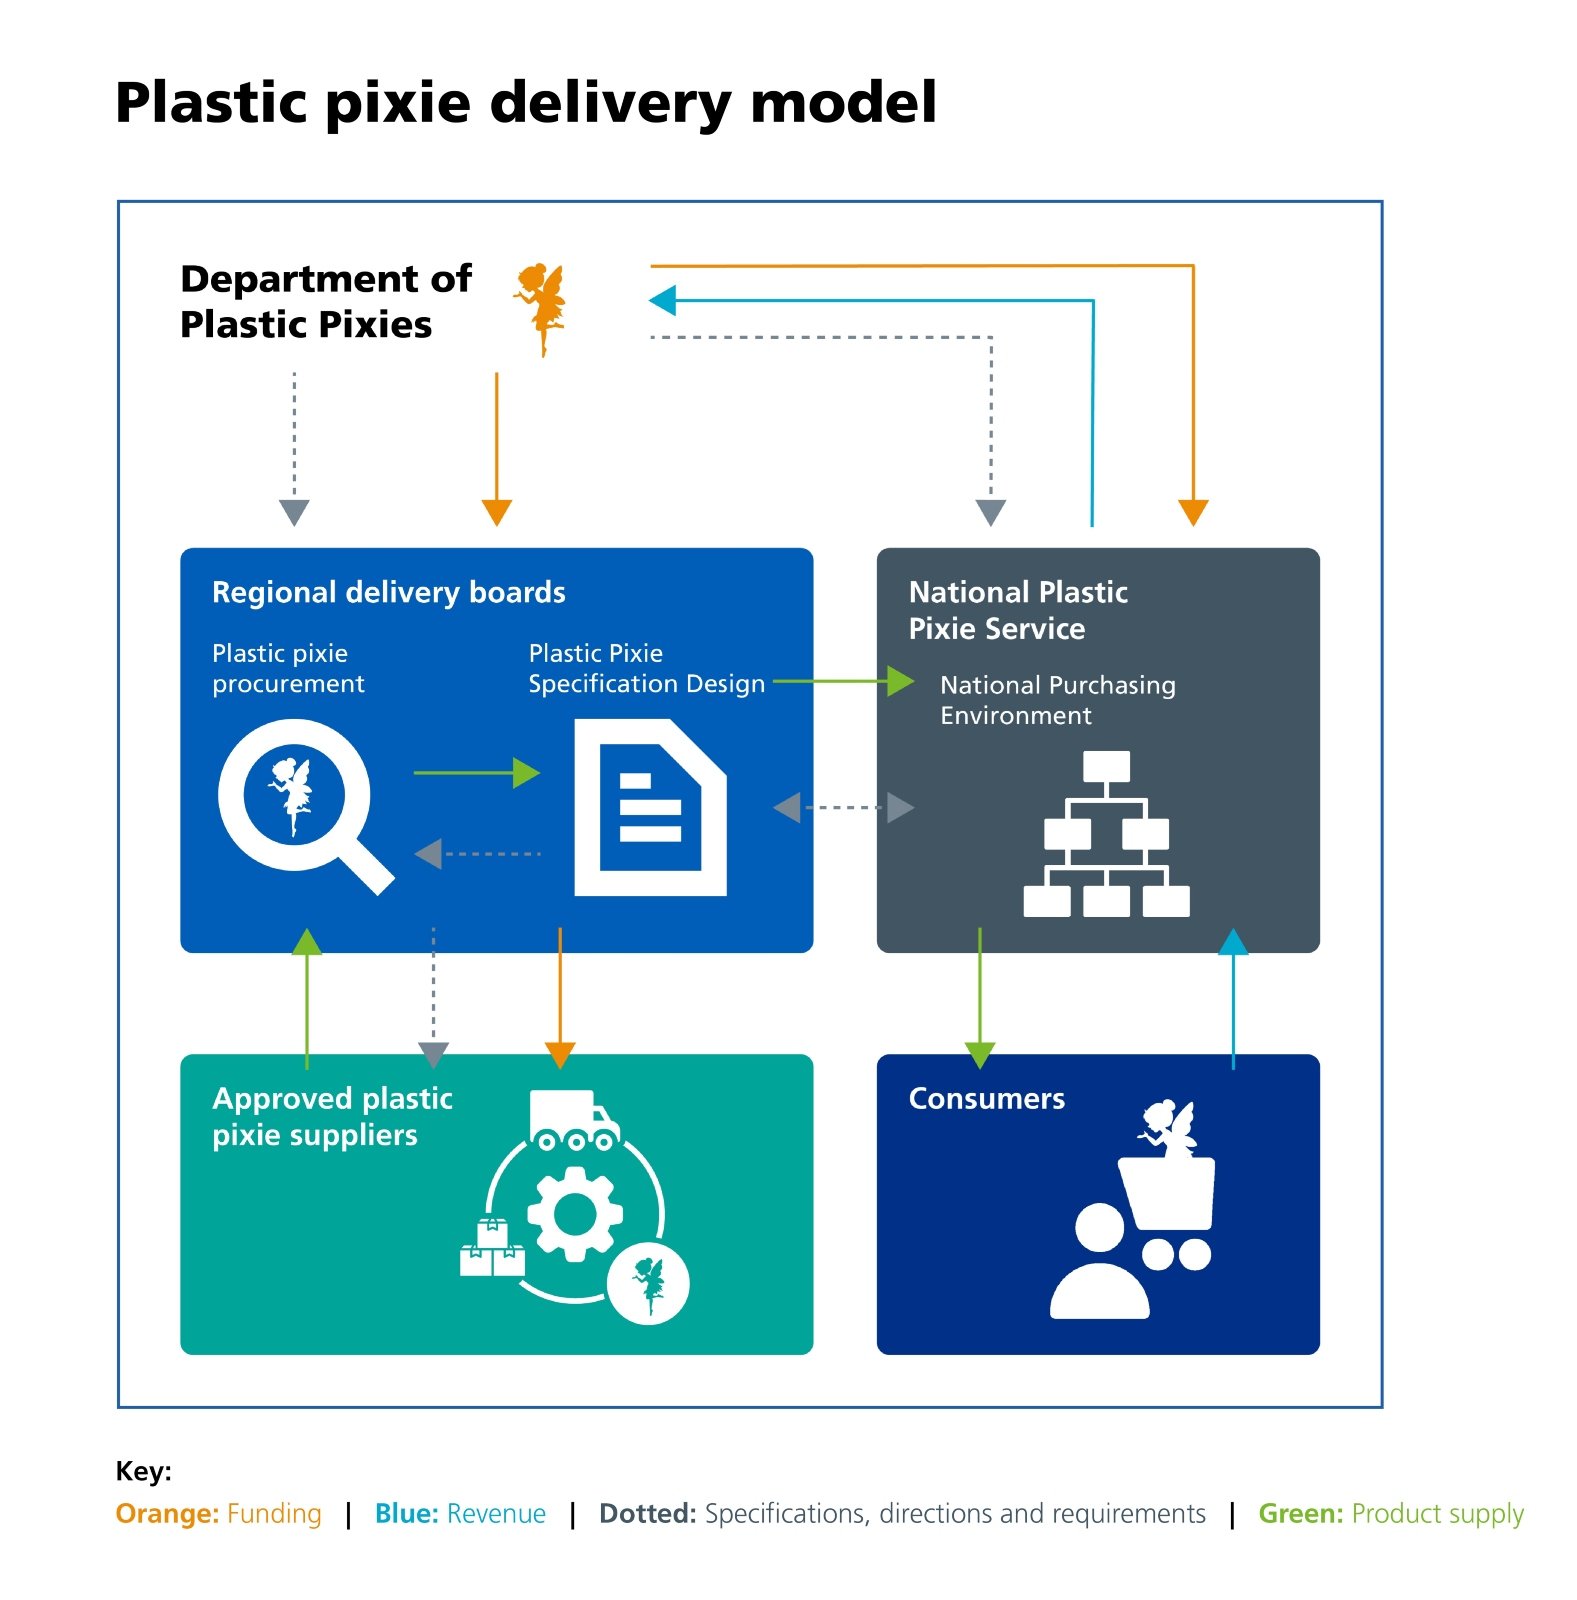 An example of a poorly designed diagram that shows the fictional ‘Plastic pixie delivery model’. Different shaded boxes with the titles ‘Regional delivery boards’, ‘National Plastic Pixie Service’, ‘Approved plastic pixie suppliers’ and ‘Consumers’ are connected by lines that have low colour contrast. There is a colour key for the lines at the bottom but no additional explanation of the delivery model is given.